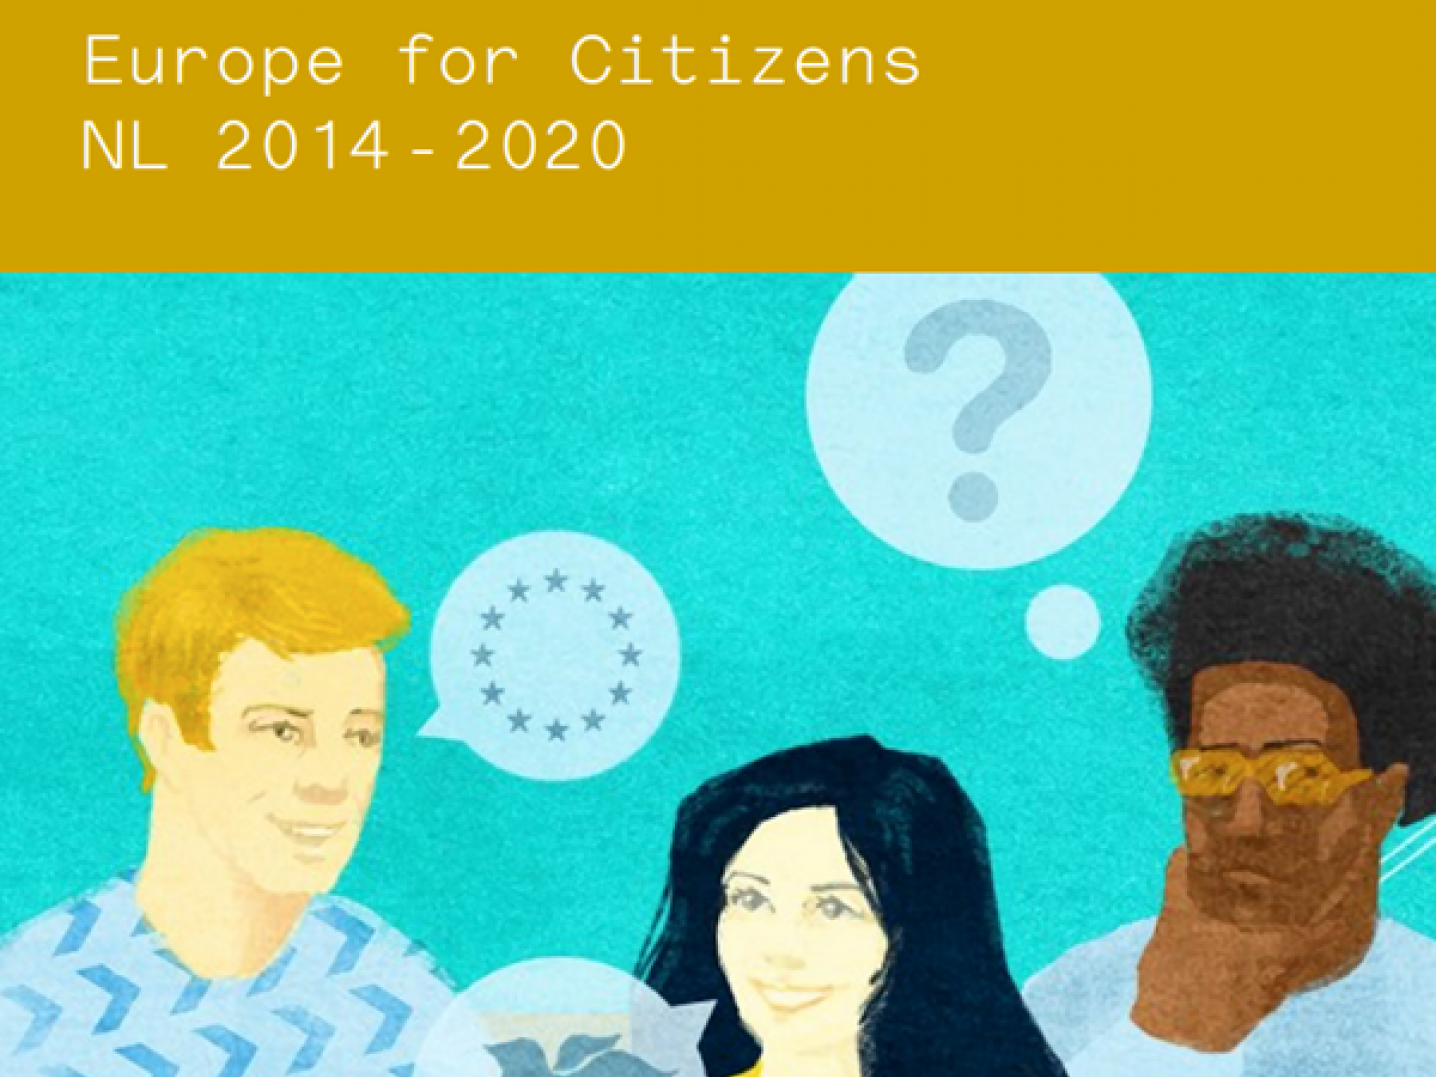 Europe for Citizens NL 2014-2020